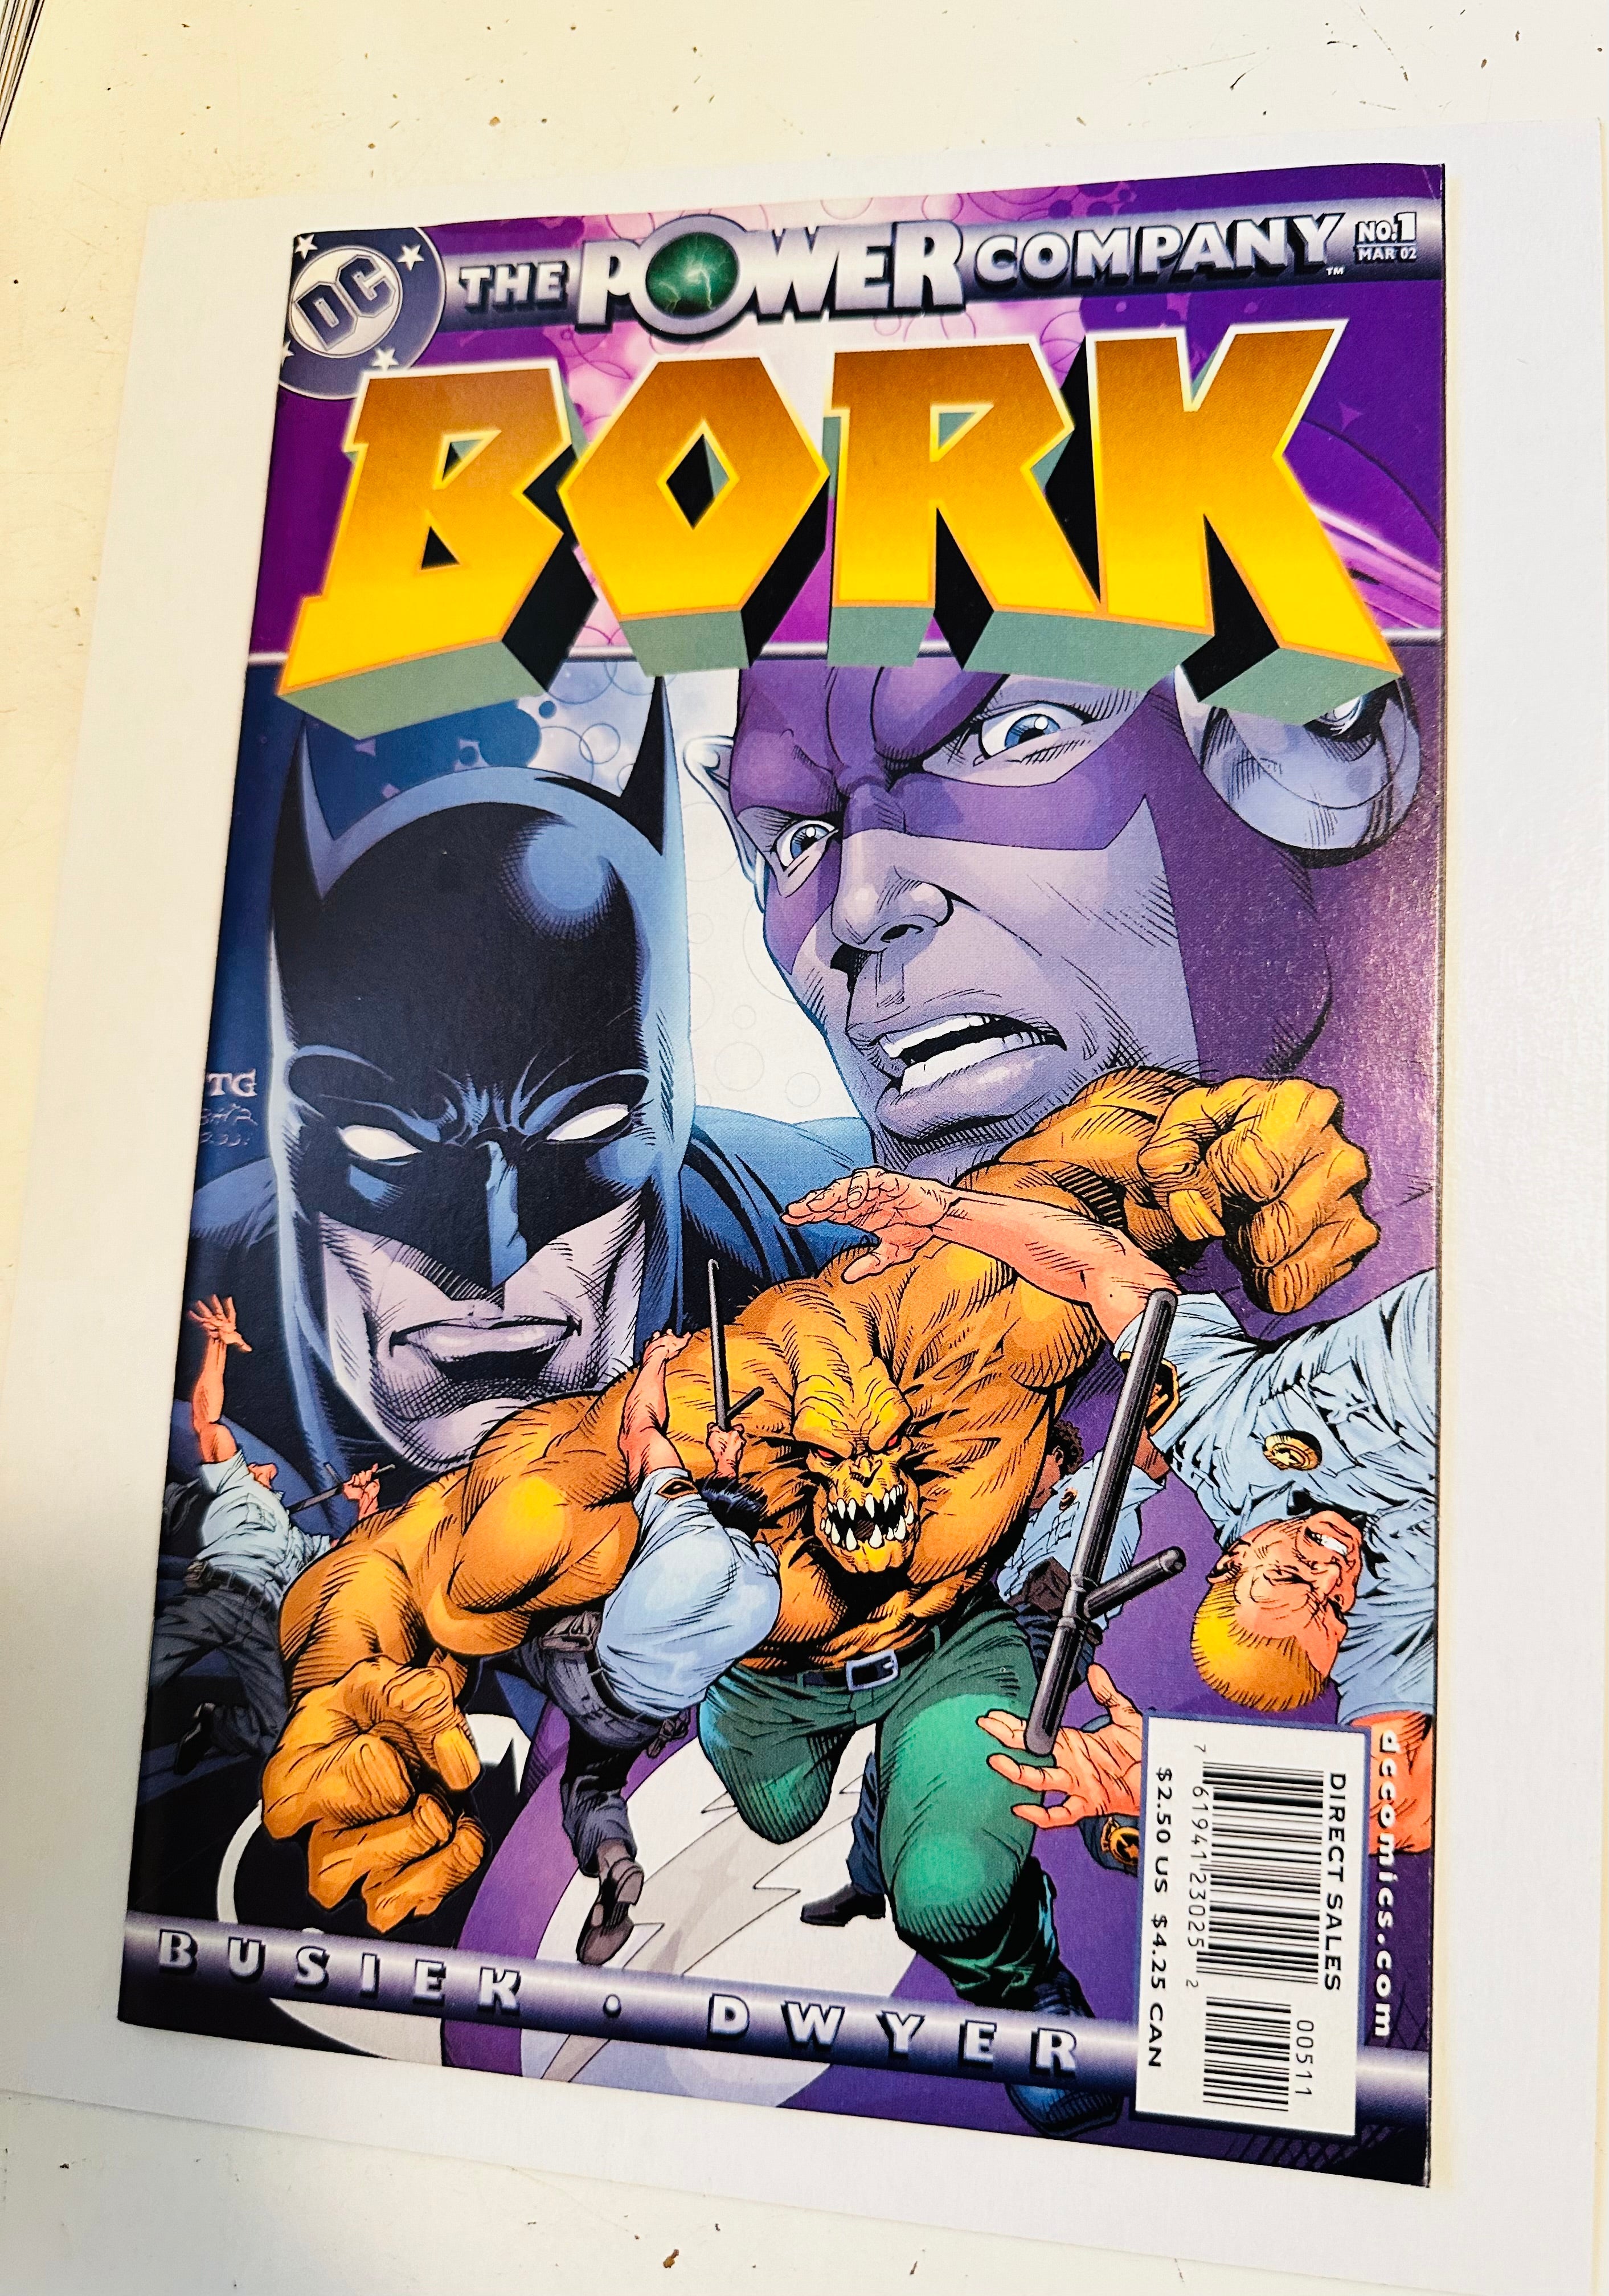 Power company Bork number one issue comic 2002